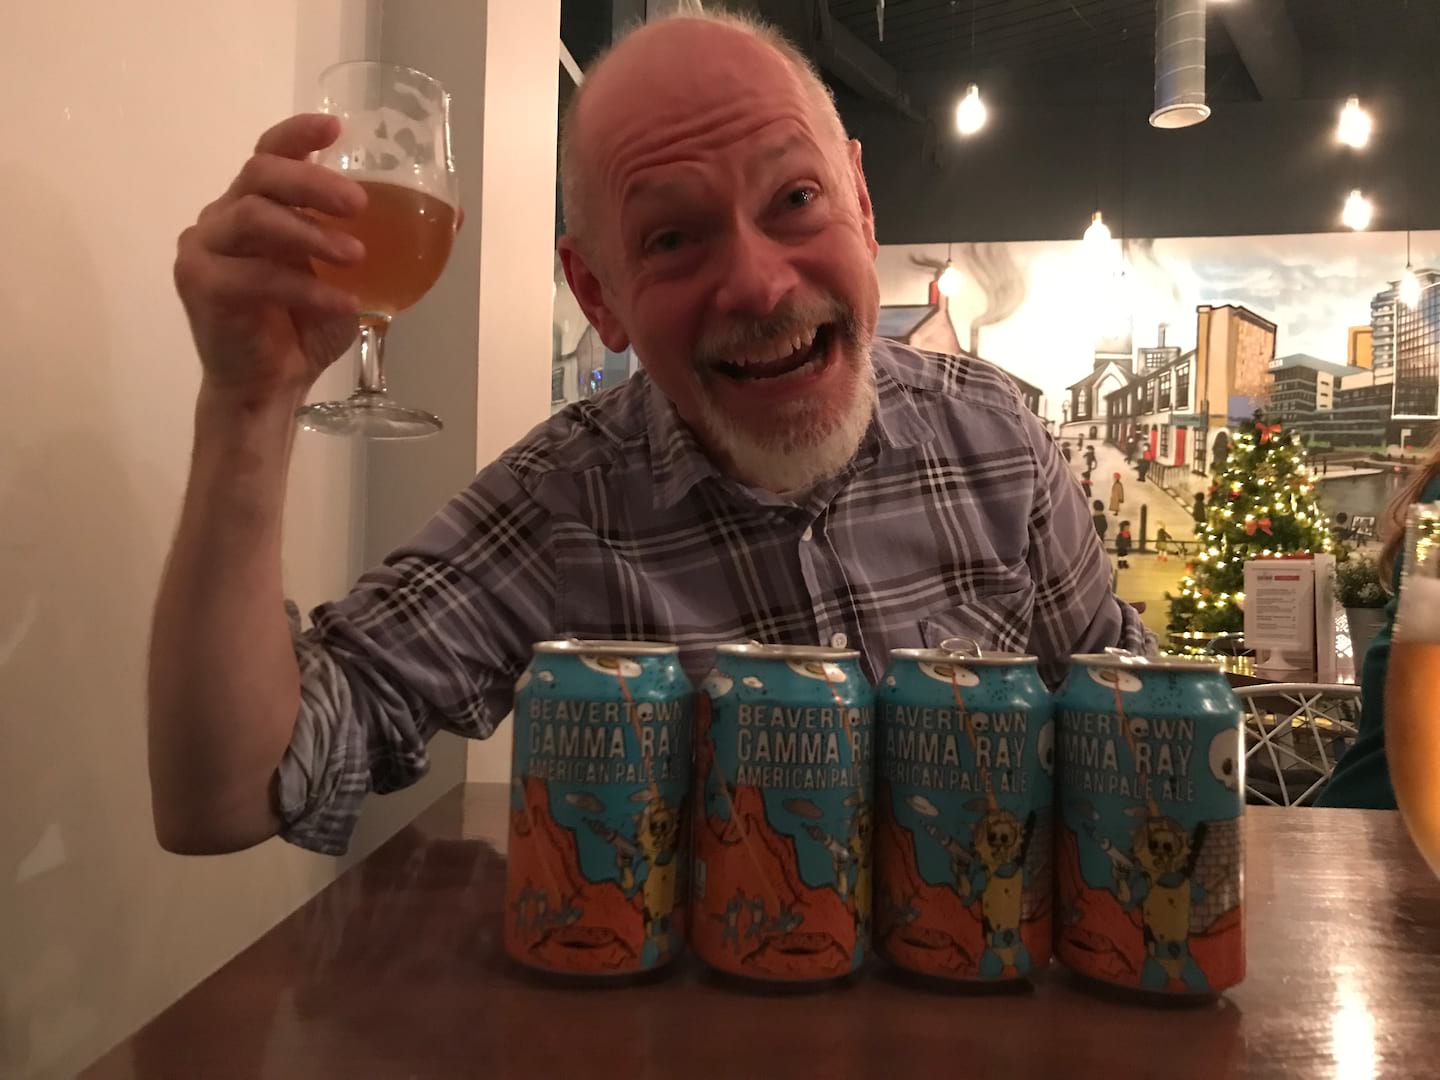 Andy is pretty happy with his beers